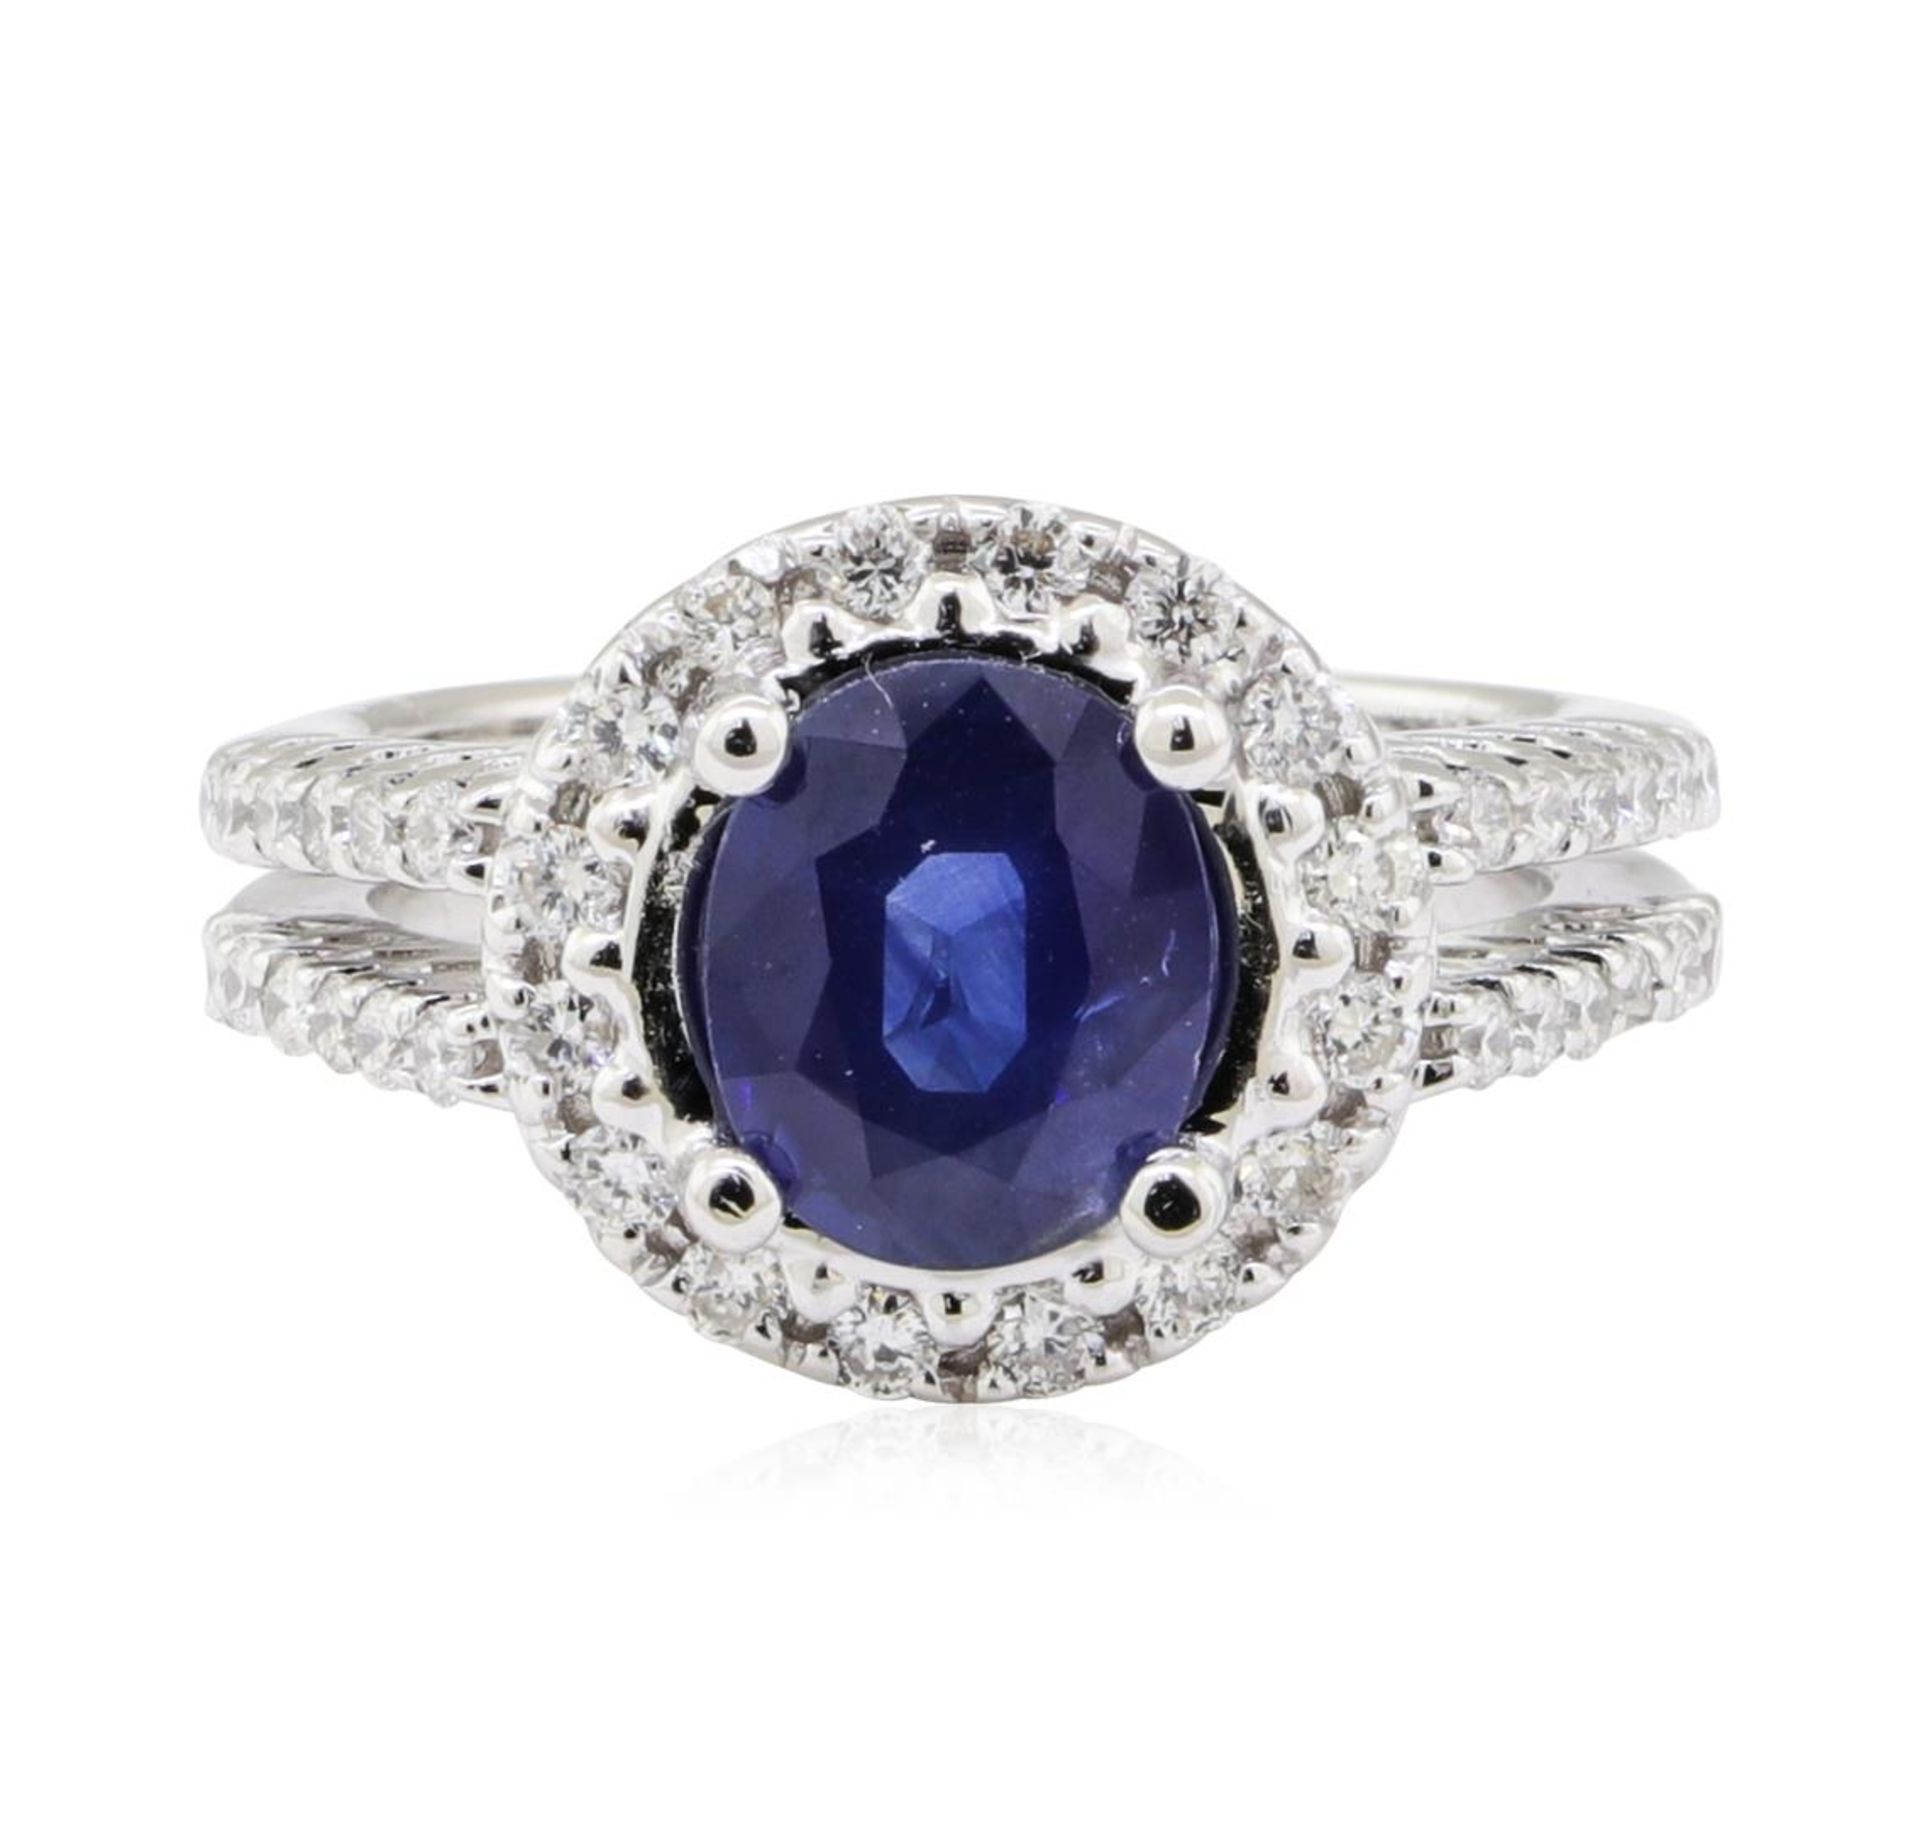 2.27 ctw Sapphire and Diamond Ring - 18KT White Gold - Image 2 of 5